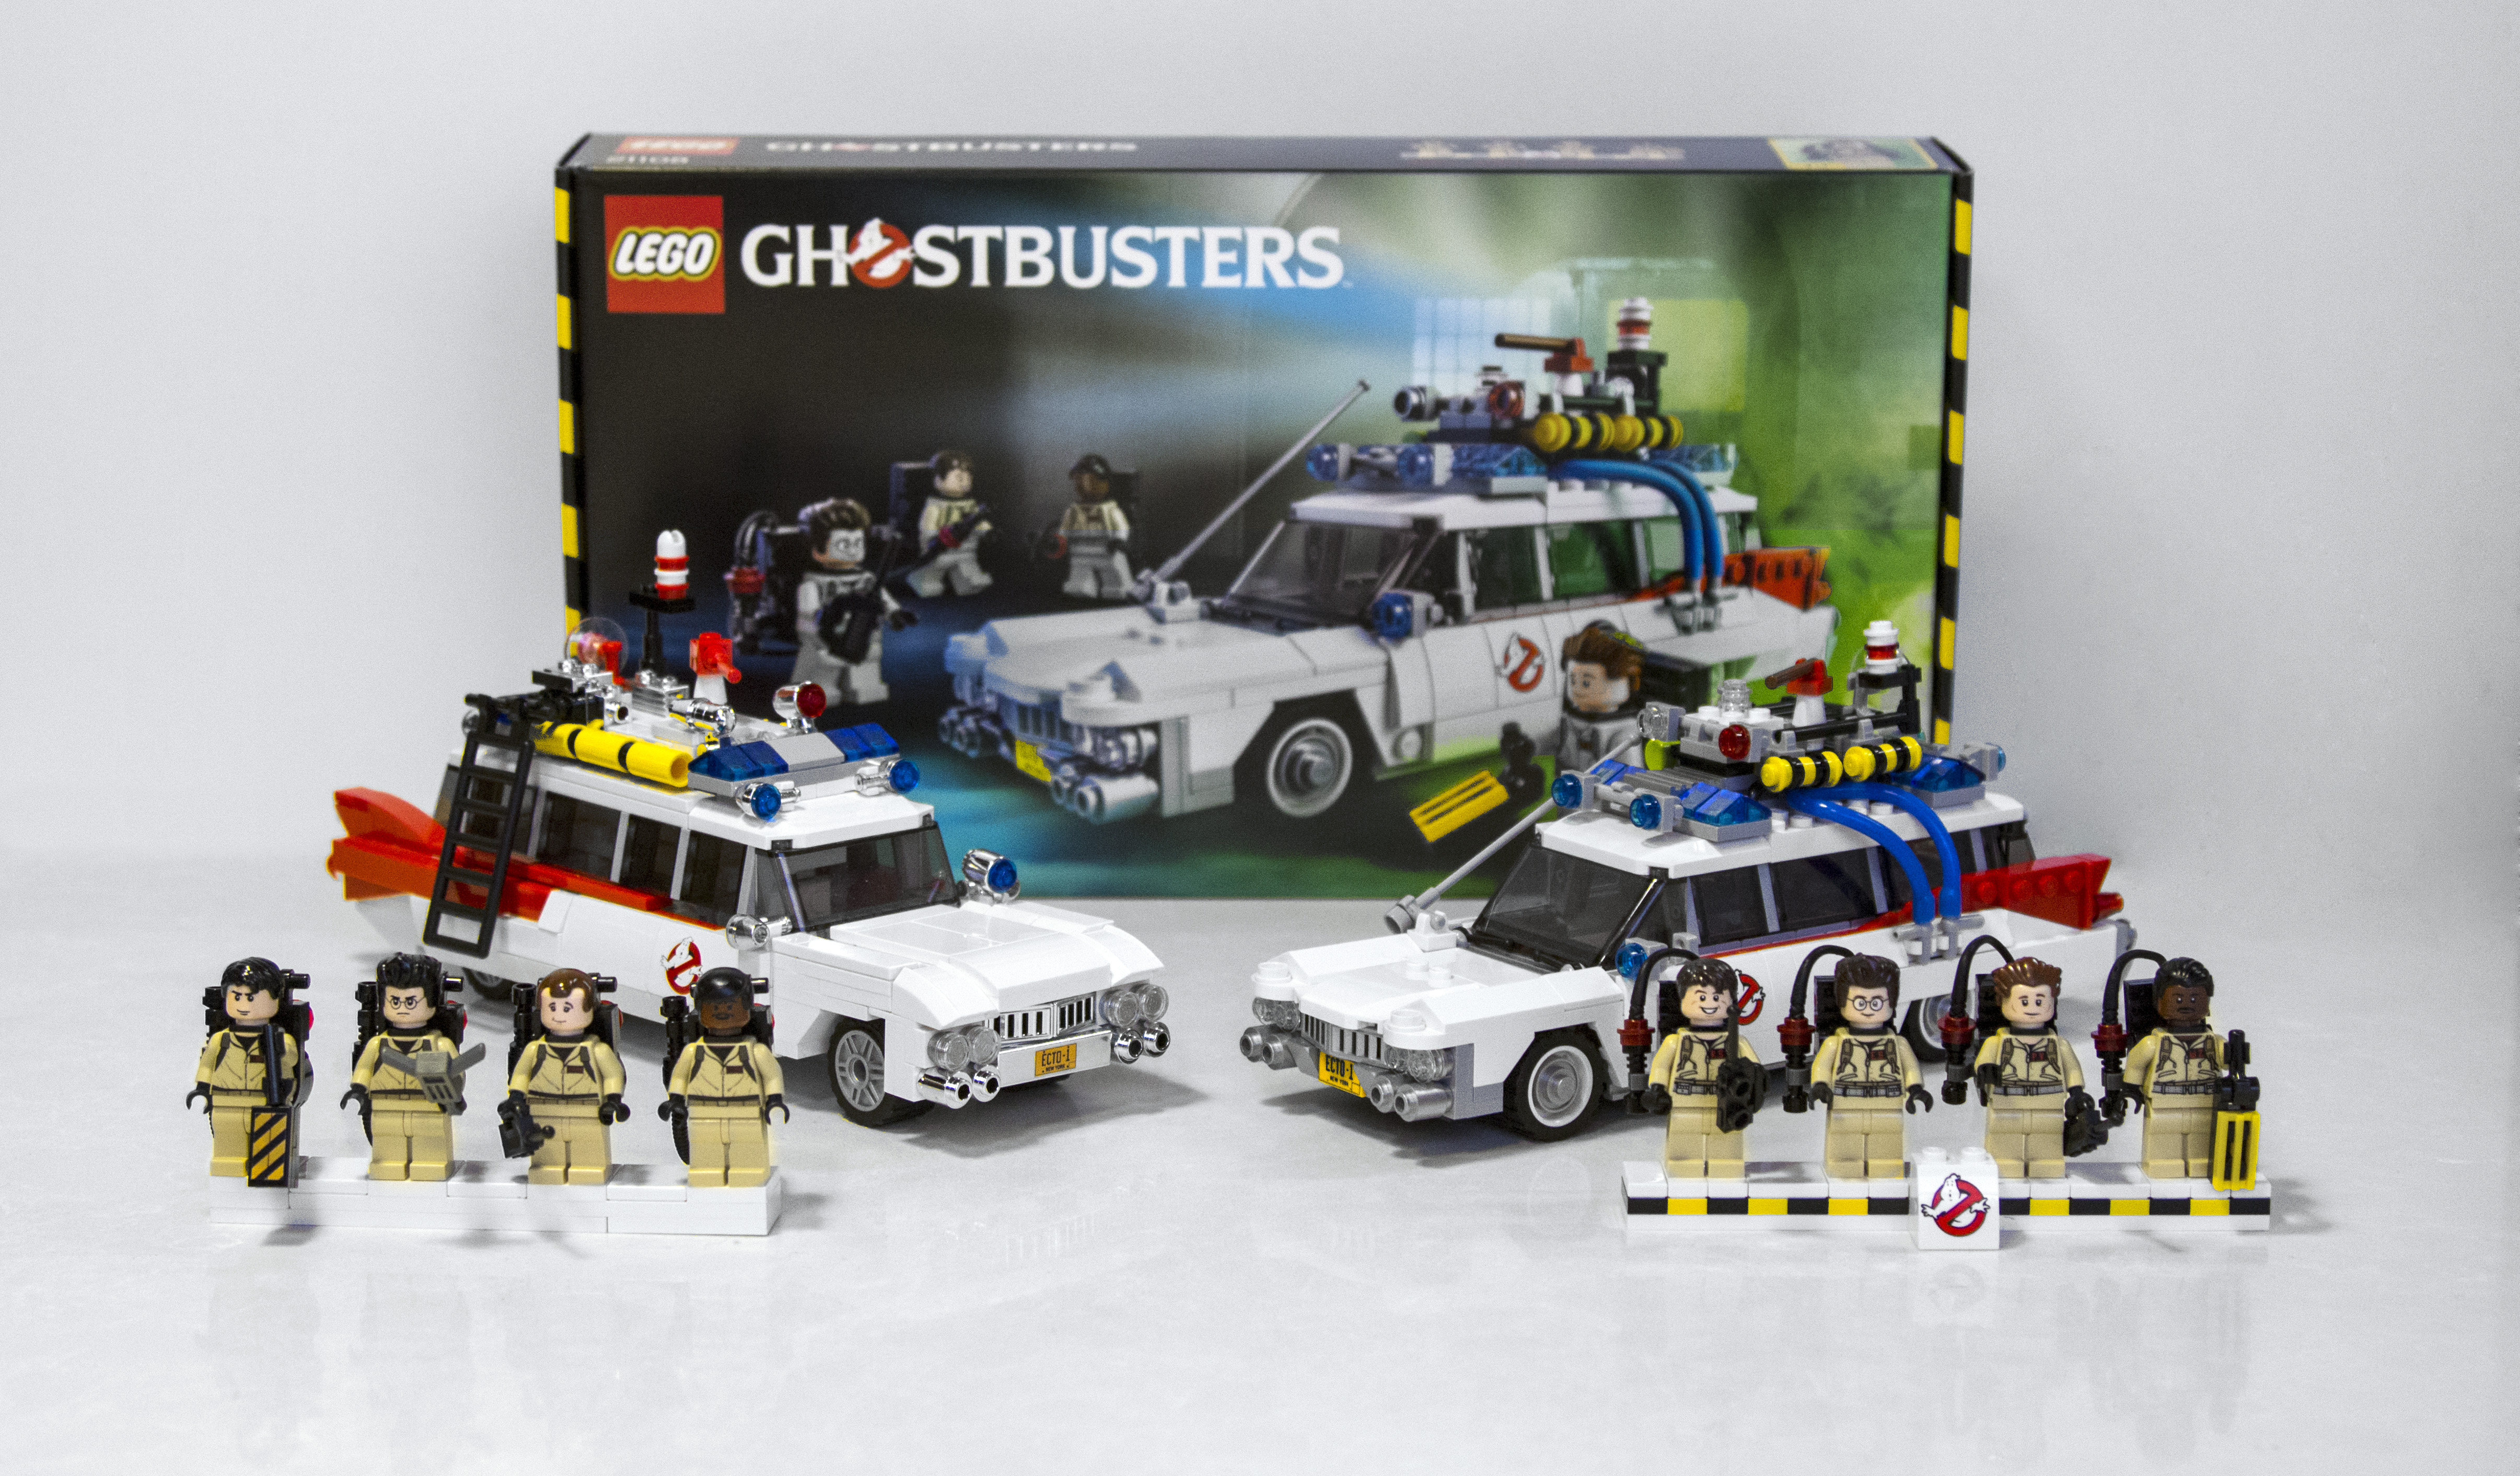 Review: LEGO 21108 Ghostbusters Ecto-1 - Jay's Brick Blog